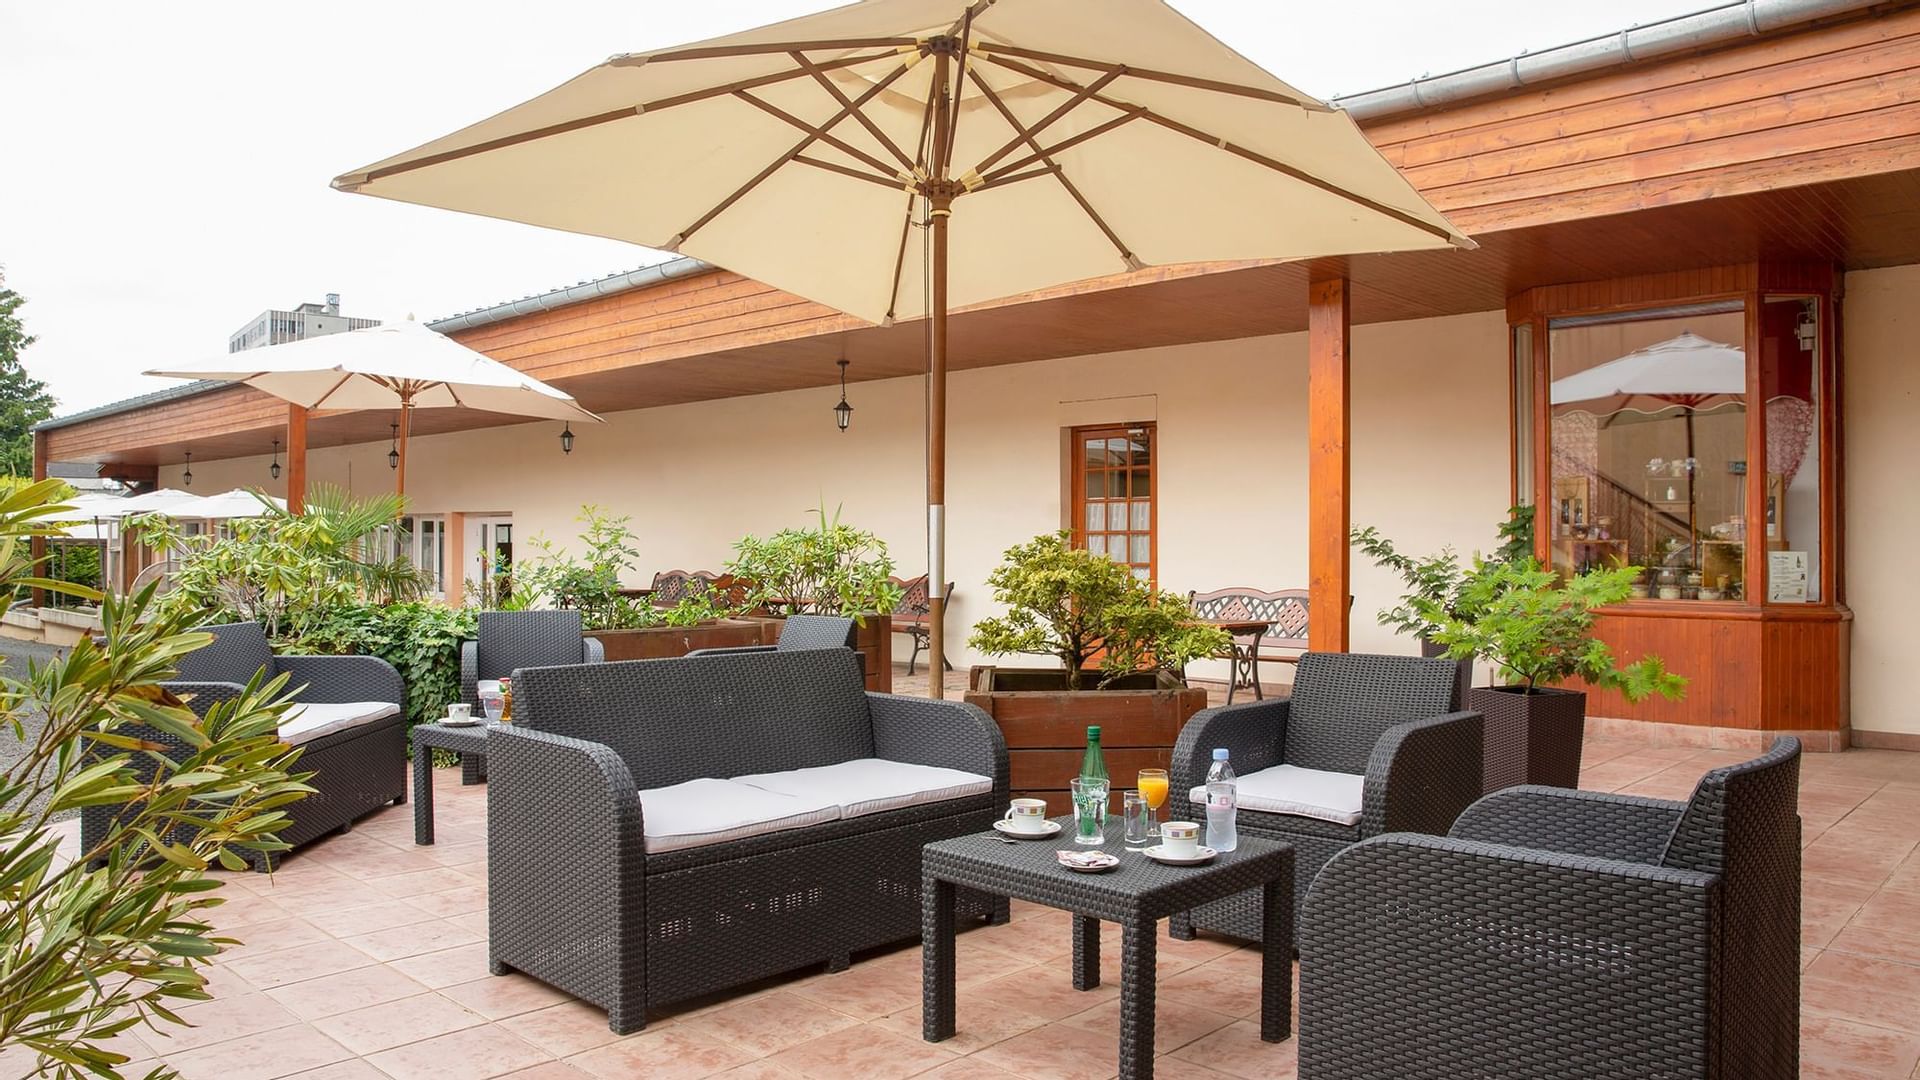 Outdoor lounge area at the Hotel Clos Sainte Marie